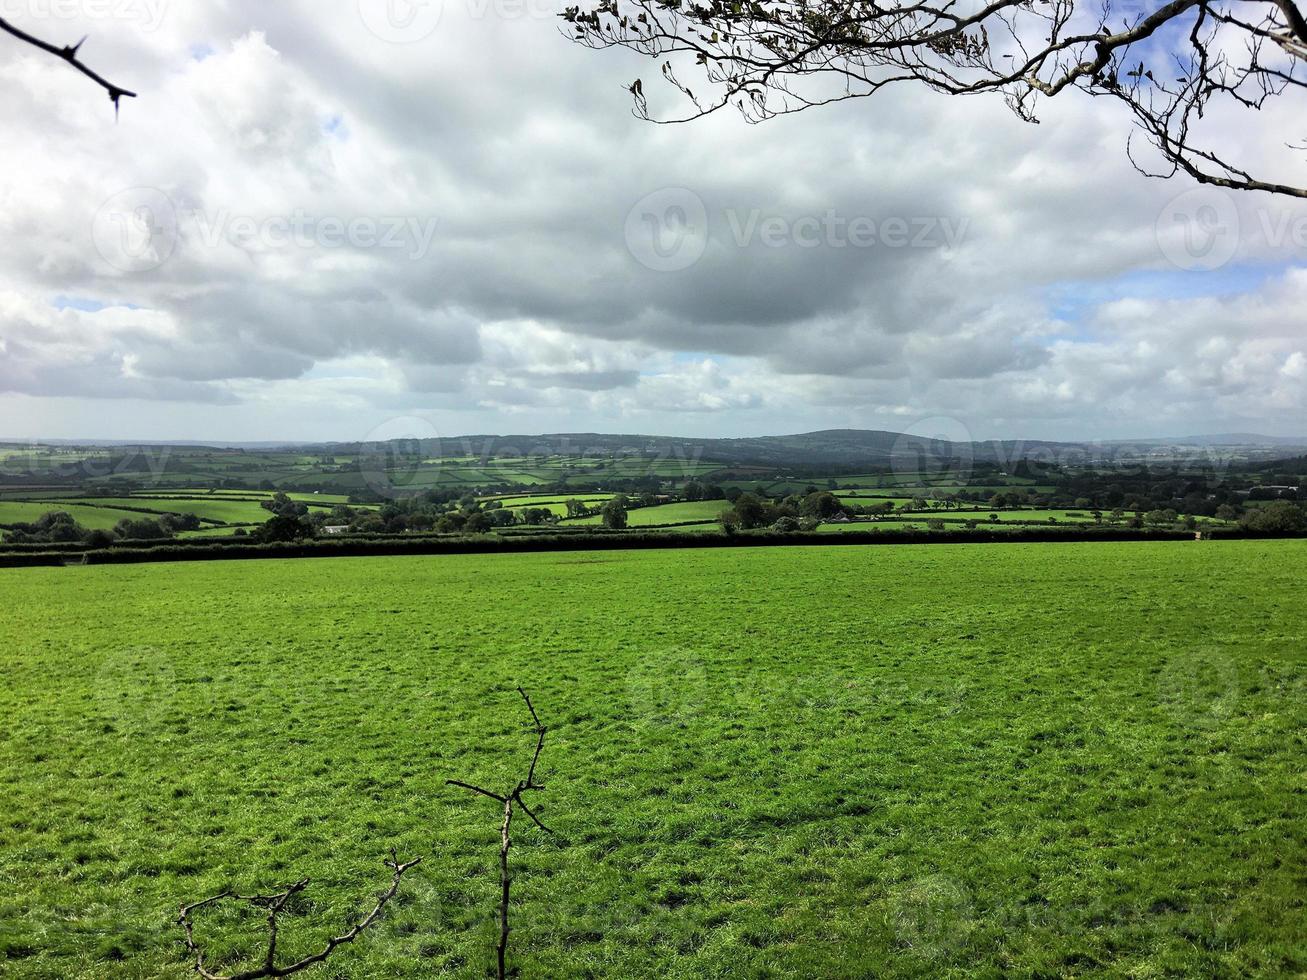 A view of the Cornwall Countryside near Dartmoor photo